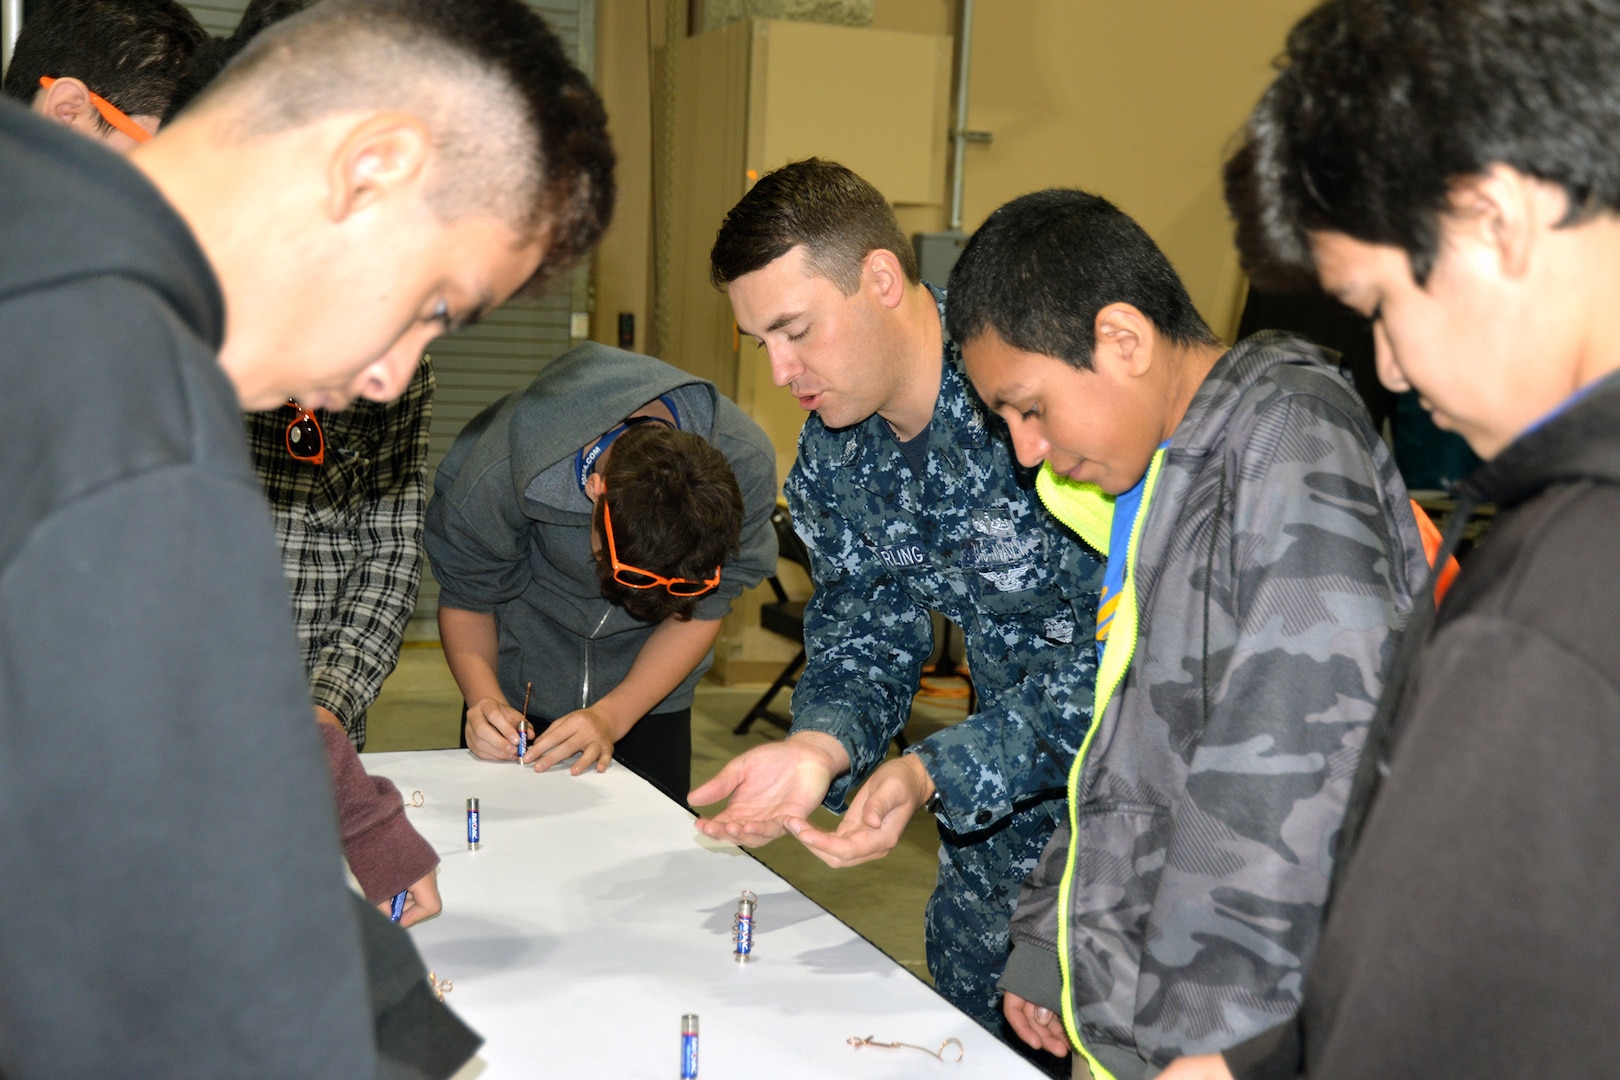 Petty Officer 1st Class Ian MacKay, Navy Recruiting District San Antonio nuclear field coordinator for South Texas, explains to middle school students about an experiment with a plastic bottle rocket at the 8th Annual San Antonio Hispanic Chamber of Commerce CORE4 STEM Expo Nov. 8 at the Freeman Expo Hall.